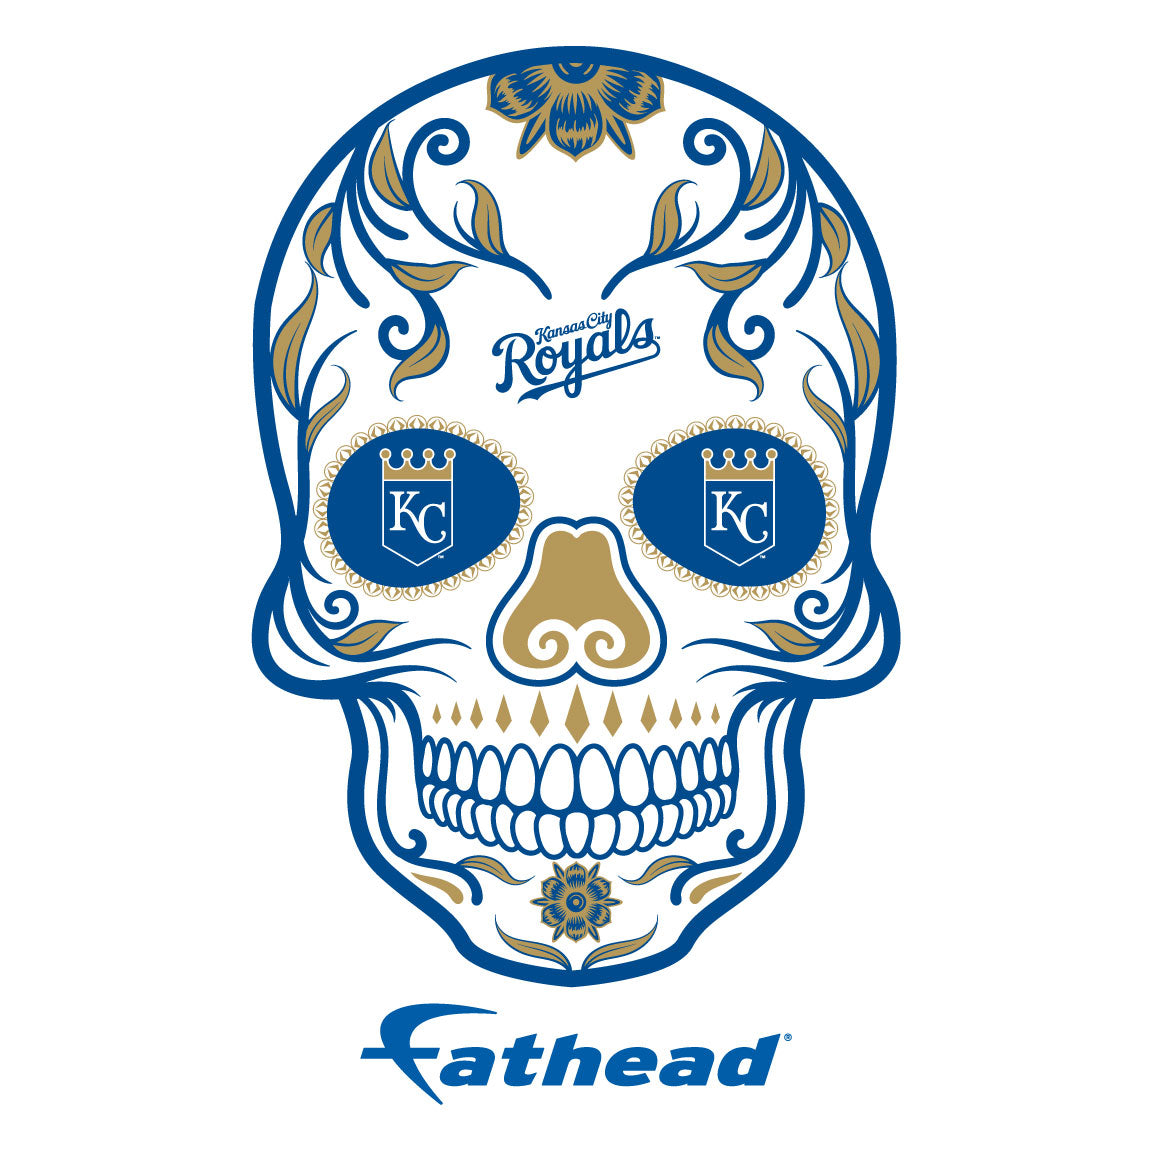 Sheet of 5 -Kansas City Royals: Skull Minis - Officially Licensed MLB Removable Adhesive Decal